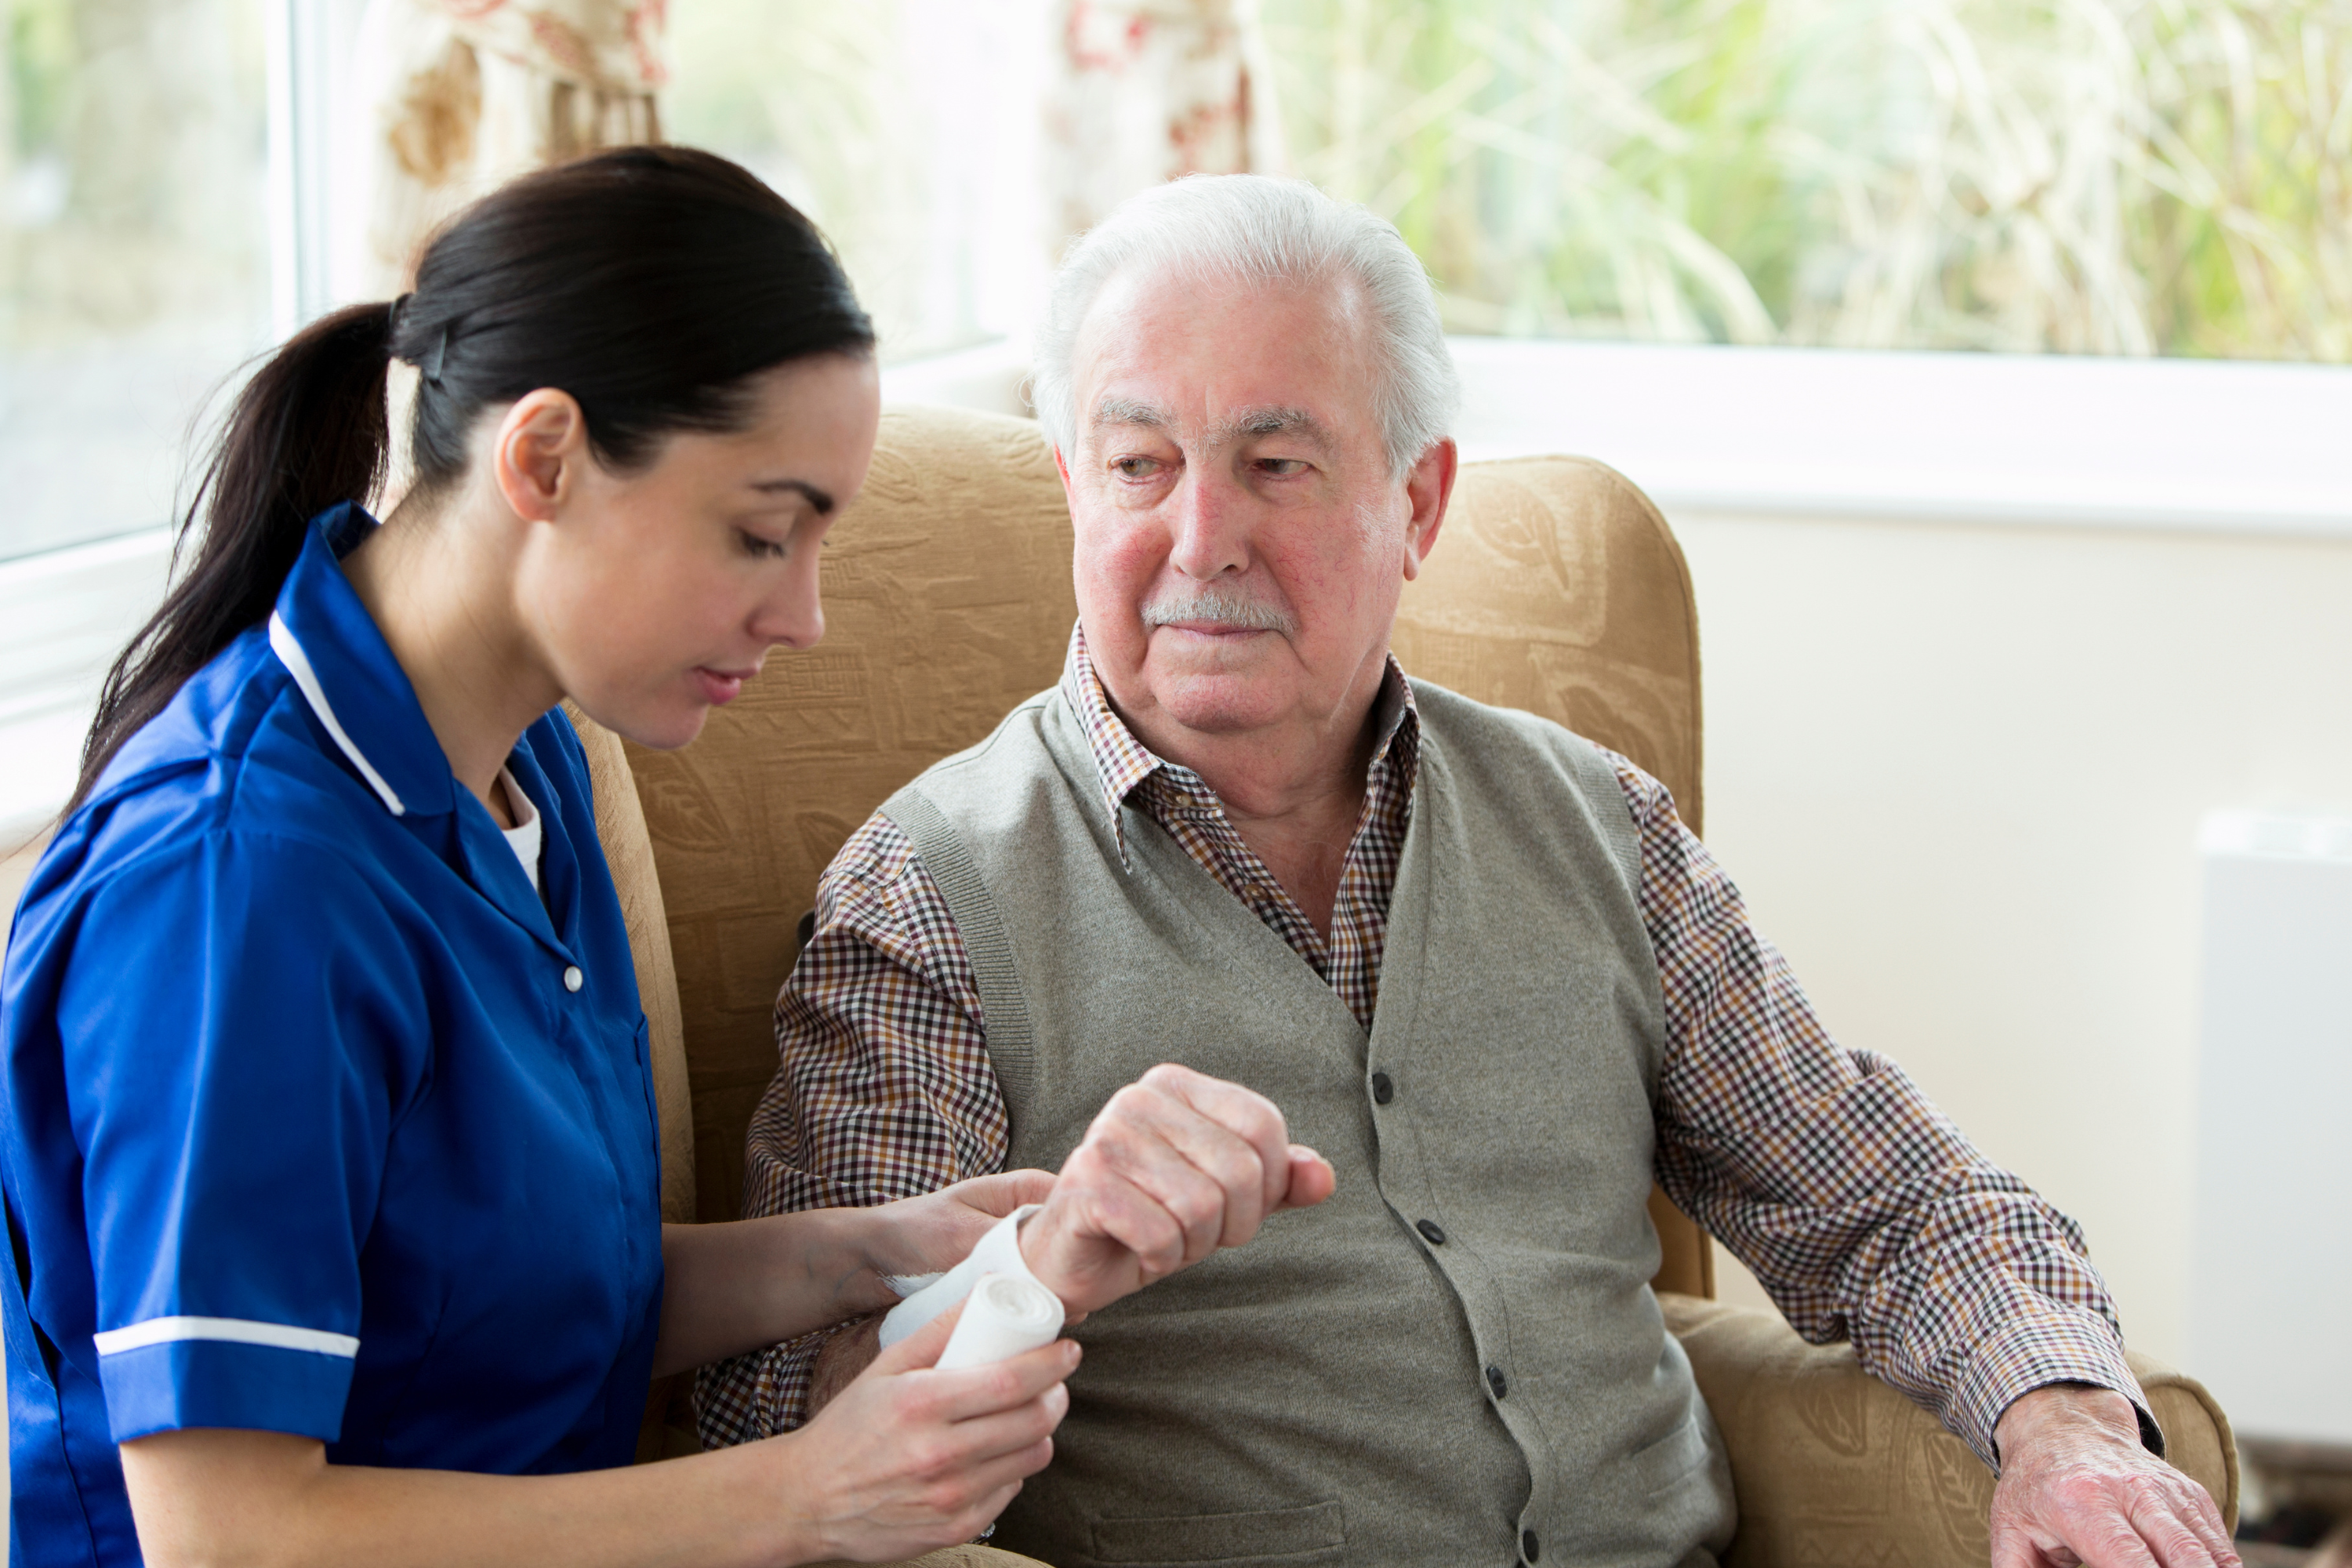 A member of care staff putting a dressing on an elderly resident's wrist.